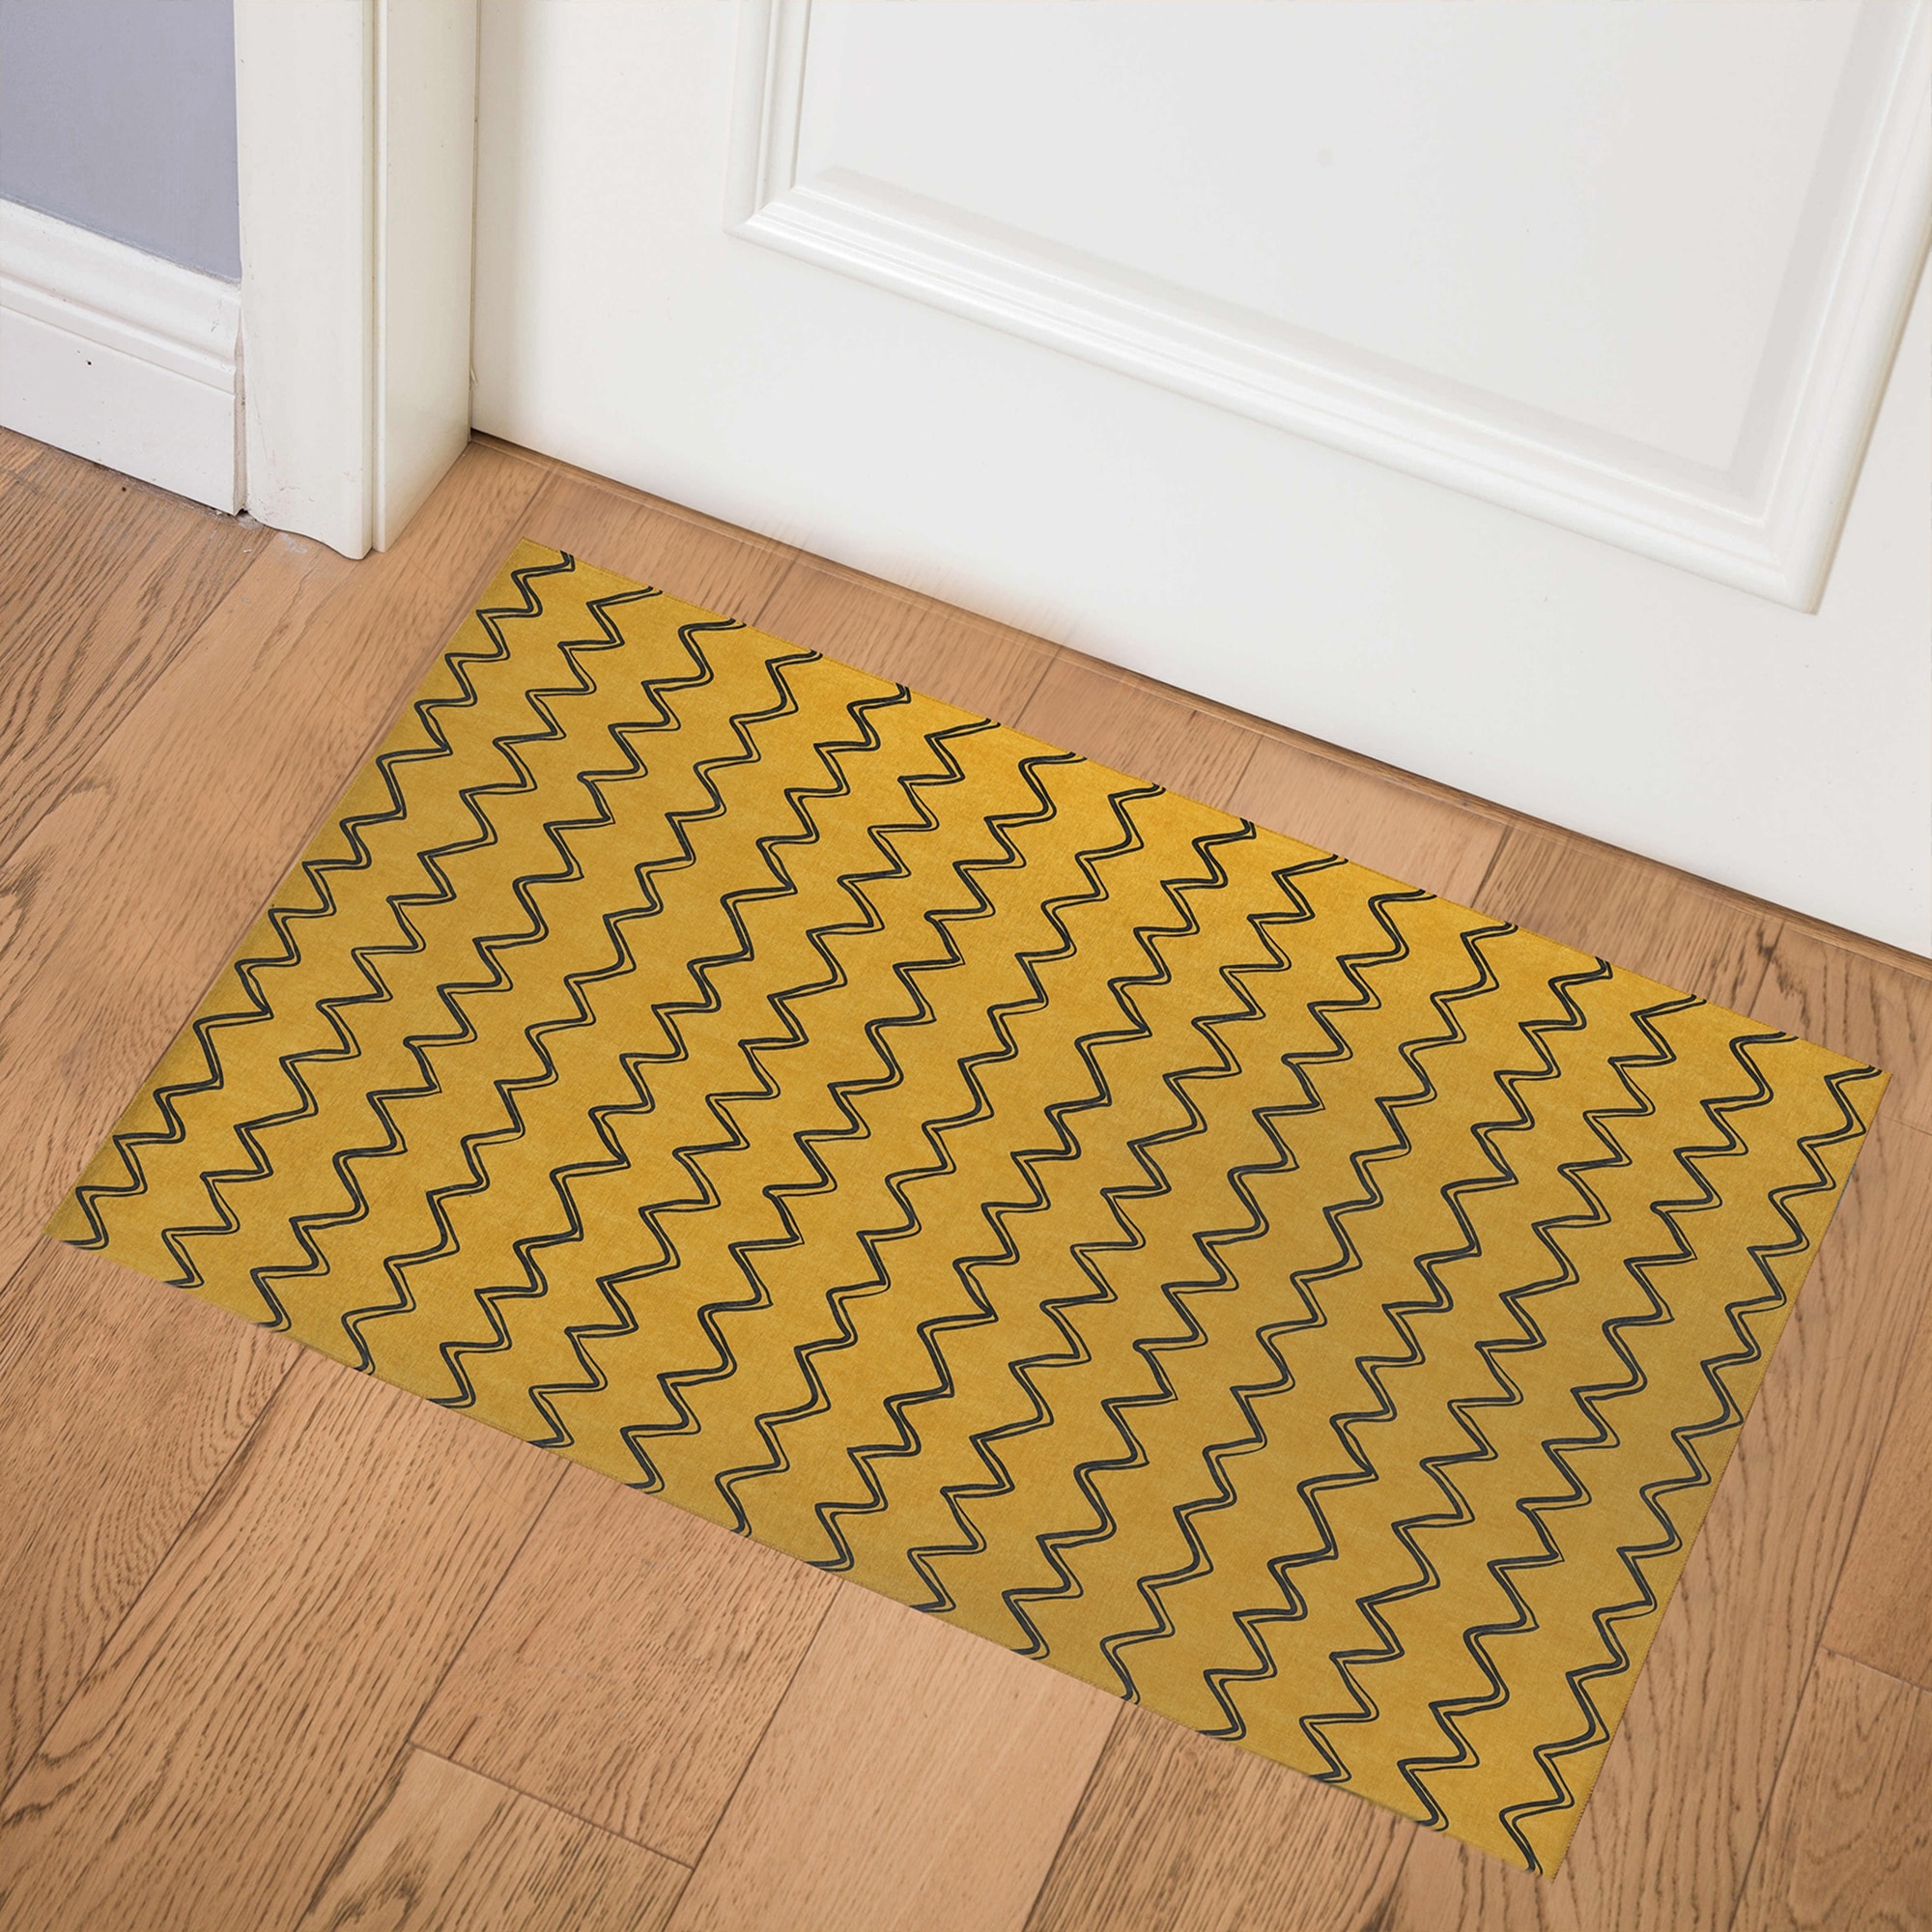 https://ak1.ostkcdn.com/images/products/is/images/direct/9e21661c3a198faa85edaa857c07aa4b9c3e2490/MOROCCAN-HORIZONTAL-STRIPE-YELLOW-Indoor-Floor-Mat-By-Kavka-Designs.jpg